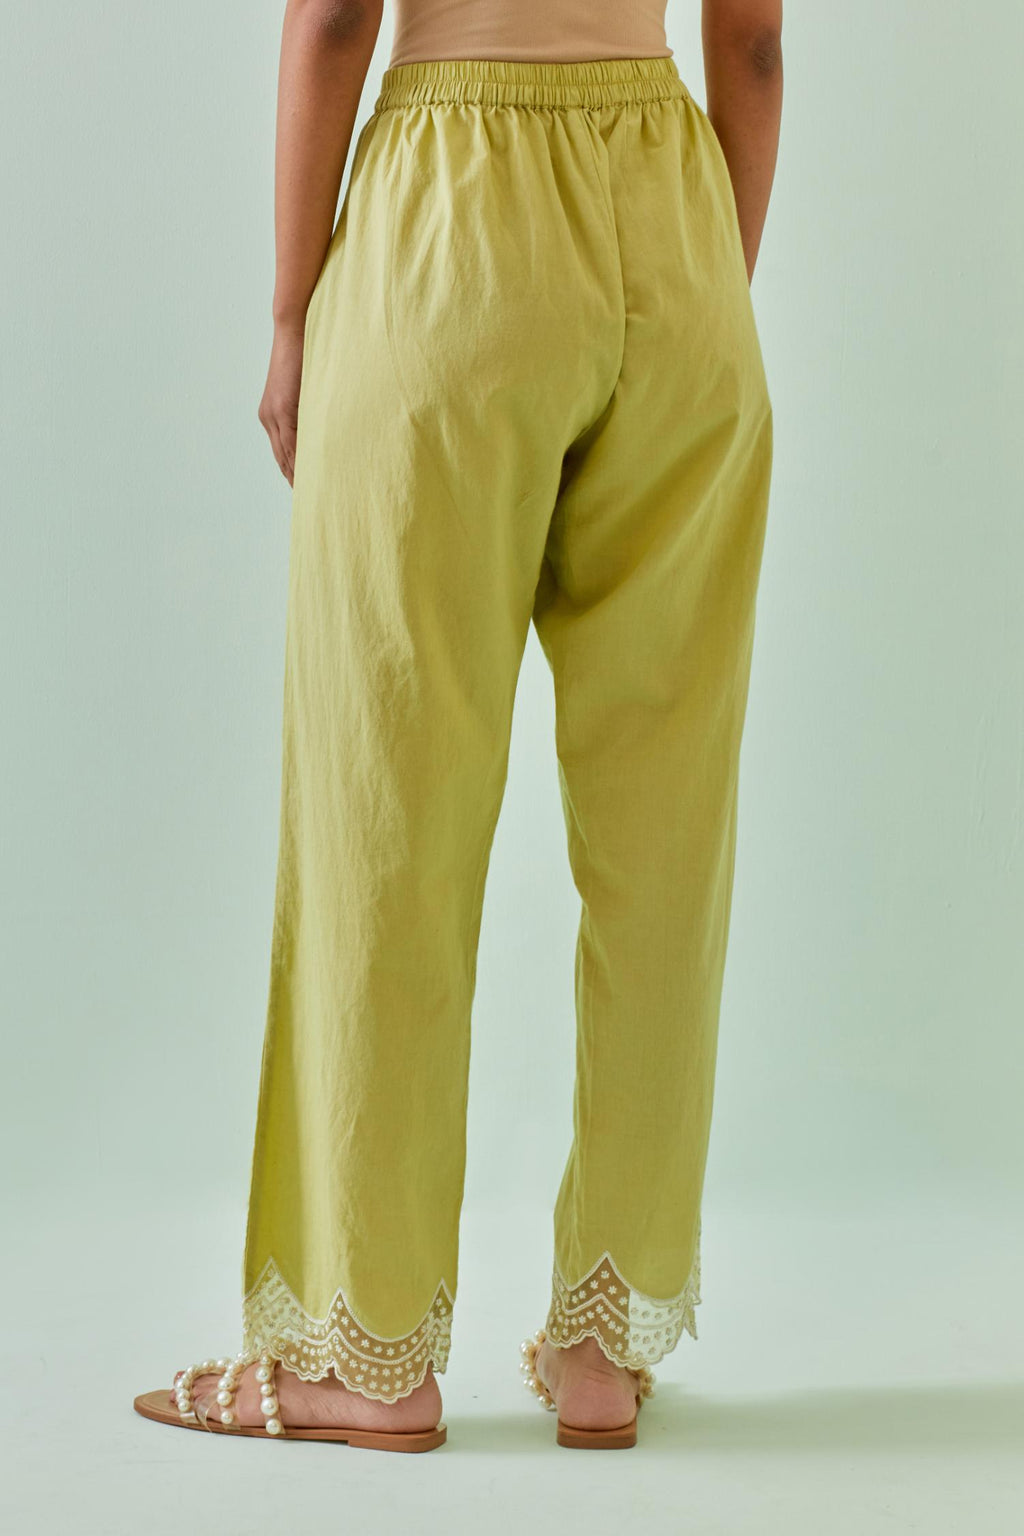 Green straight pants with scalloped embroidery at bottom hem.